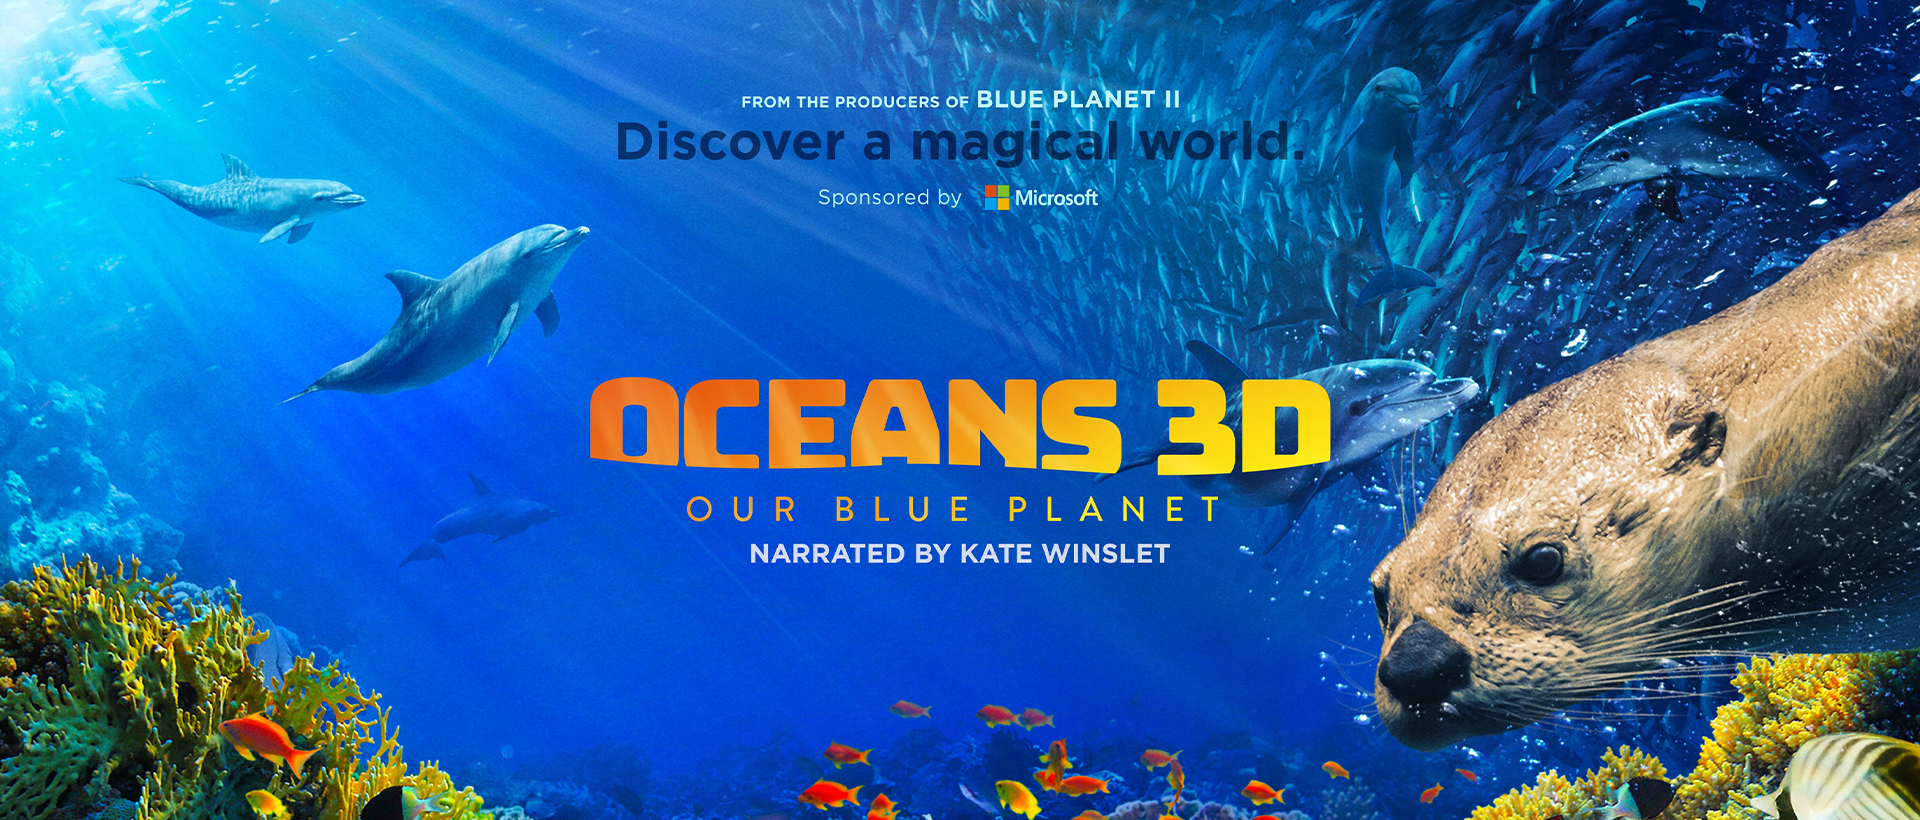 Deep blue underwater scene with a sea otter in the foreground. Text reads "From the Producers of Blue Planet 2, Discover a New World — Oceans 3D: Our Blue Planet, Narrated by Kate Winslet"